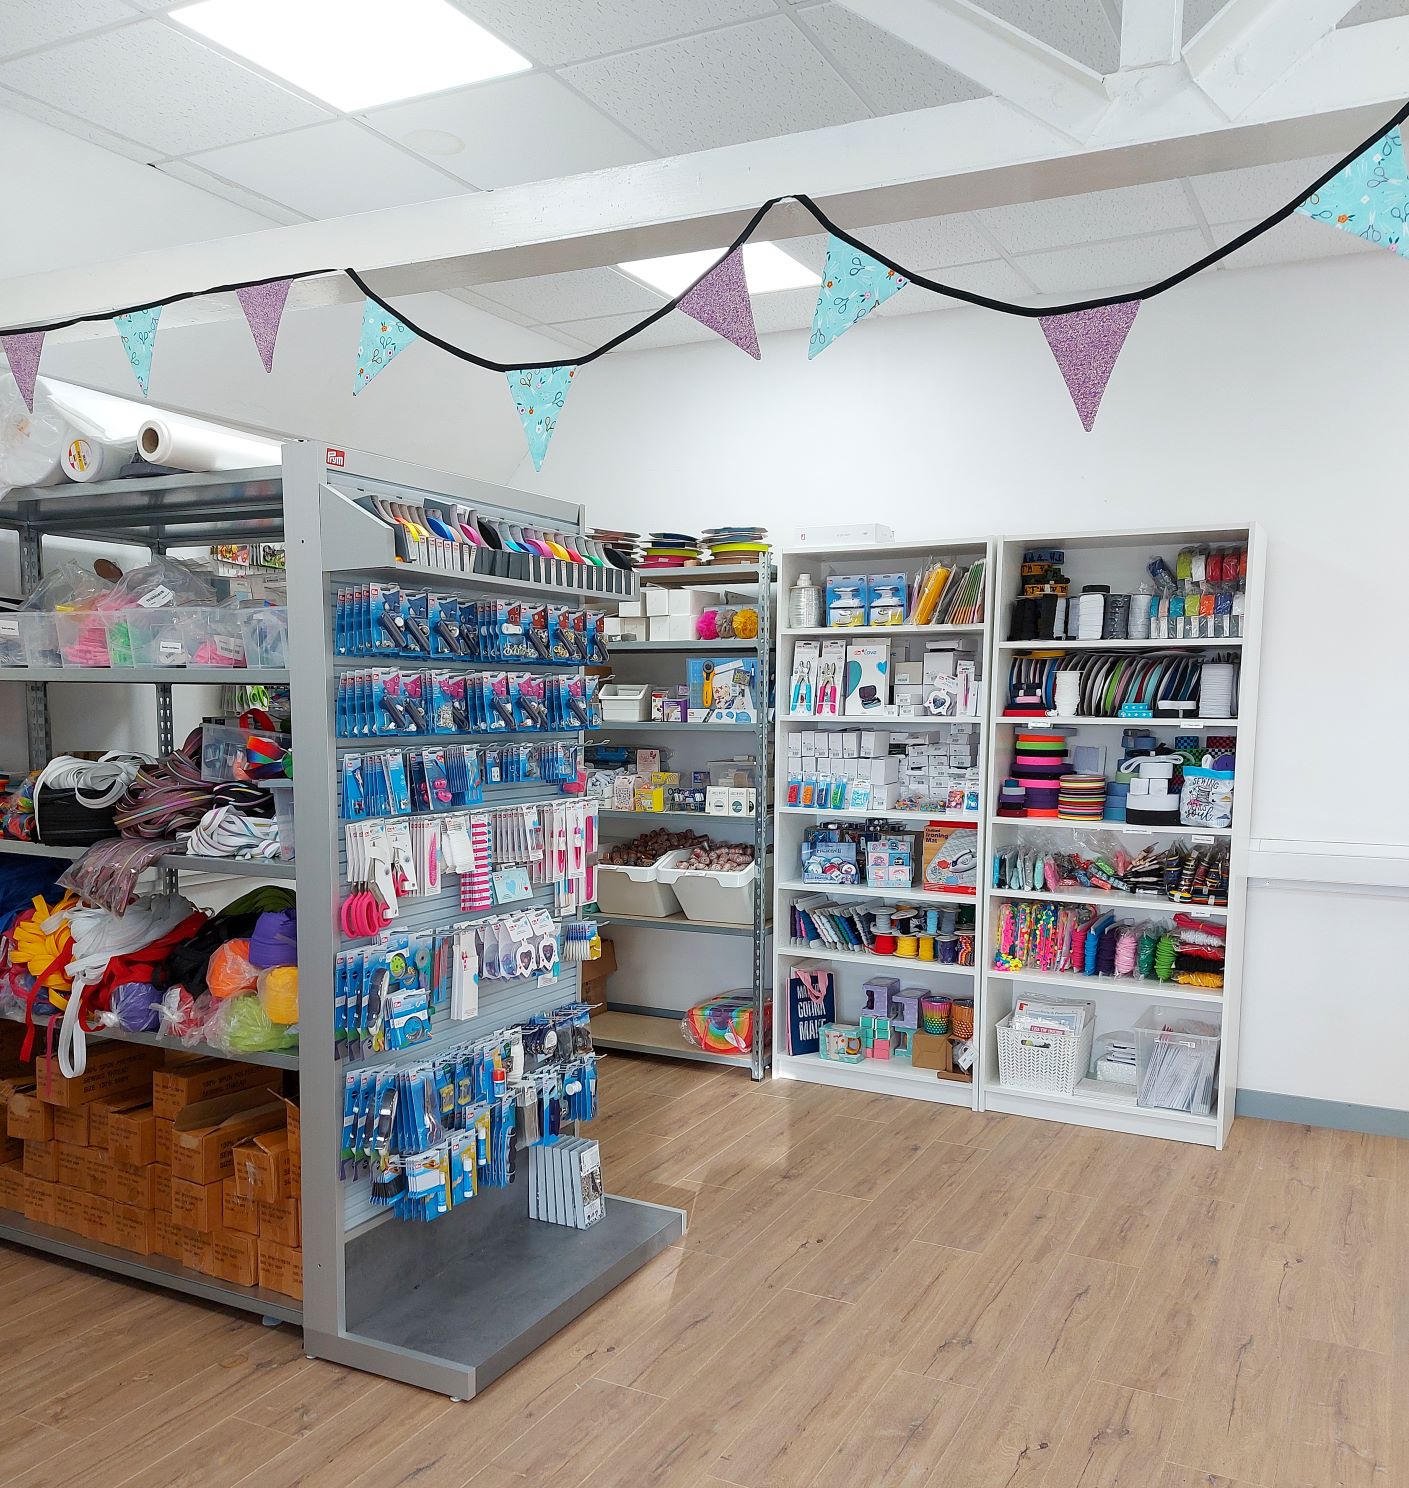 Little T's Haberdashery is based at the Genesis Business Centre in Alfreton